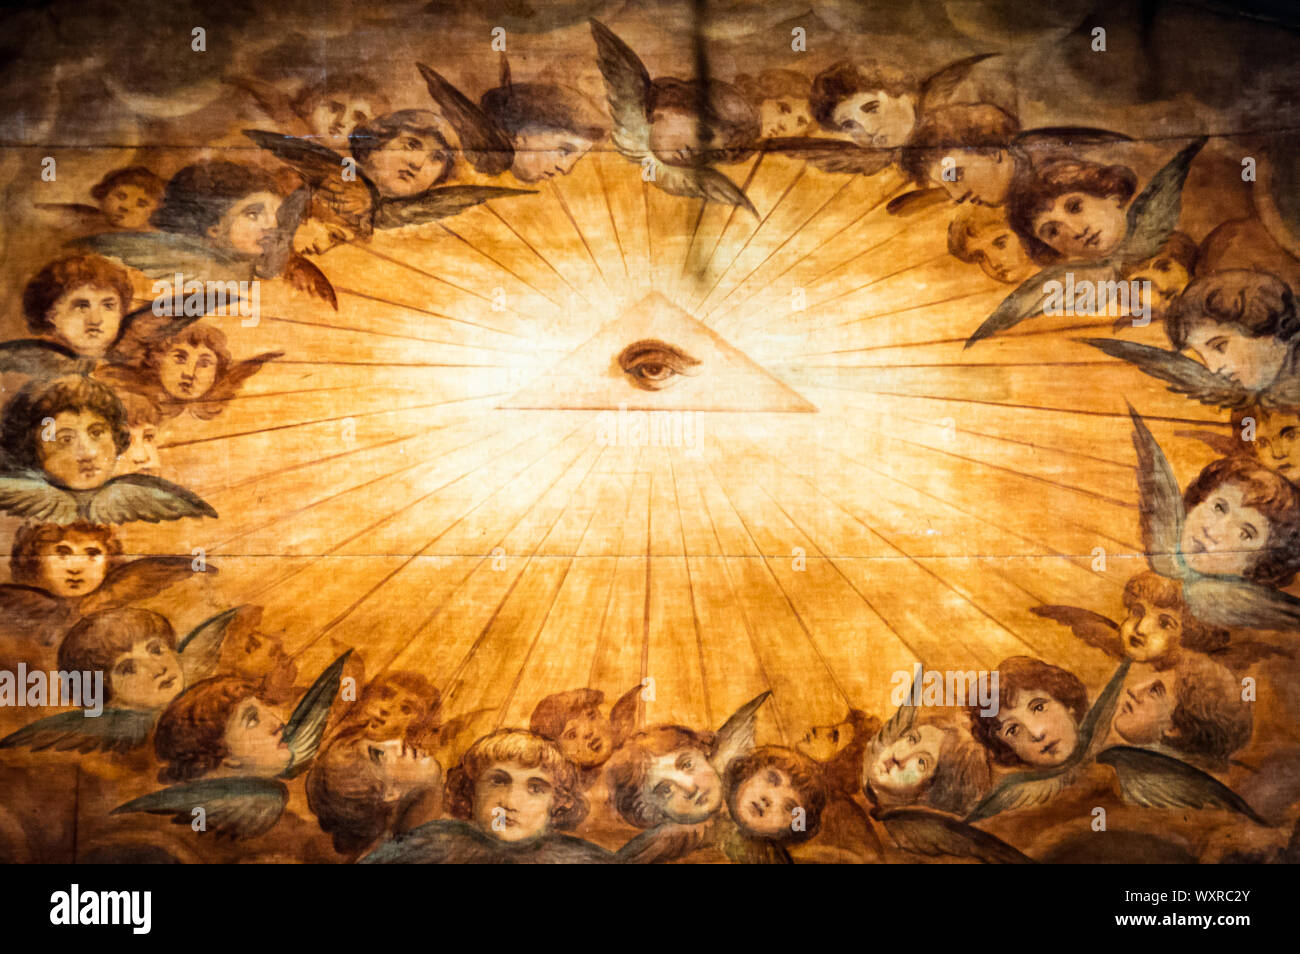 Close up view of the eye of providence, or all-seeing eye of god, symbol surrounded by angels that can be seen in some European churches.  Eye can be Stock Photo